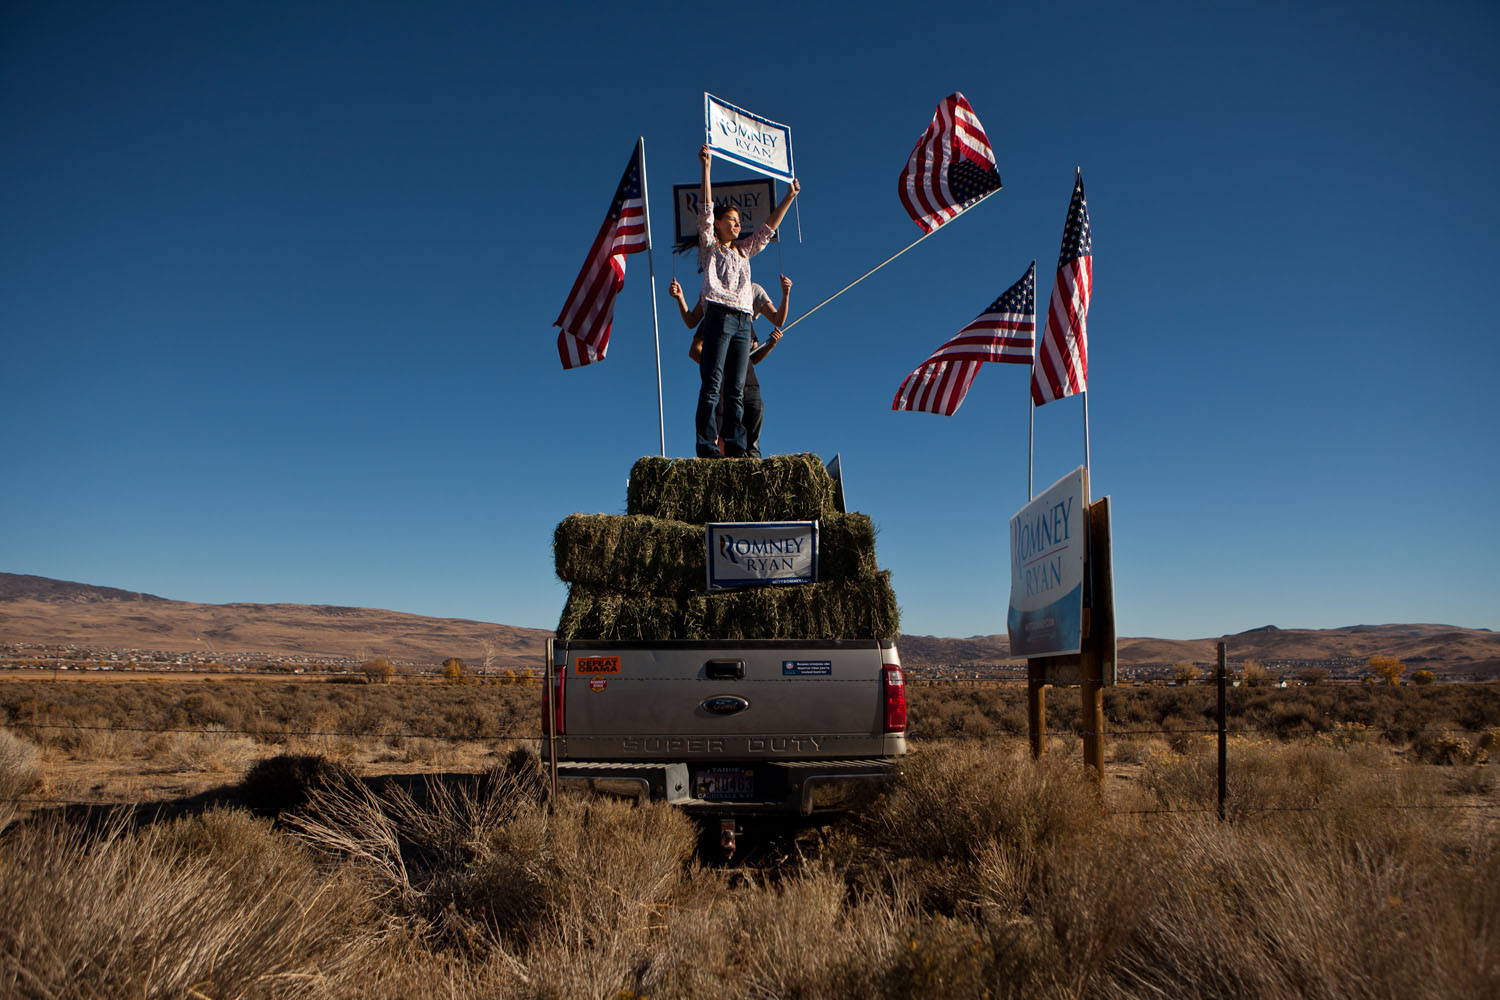 Image: Nov. 6, 2012. Kenady Pettingill, 12, and friends urge drivers to vote for Mitt Romney in Spanish Springs, Nev.